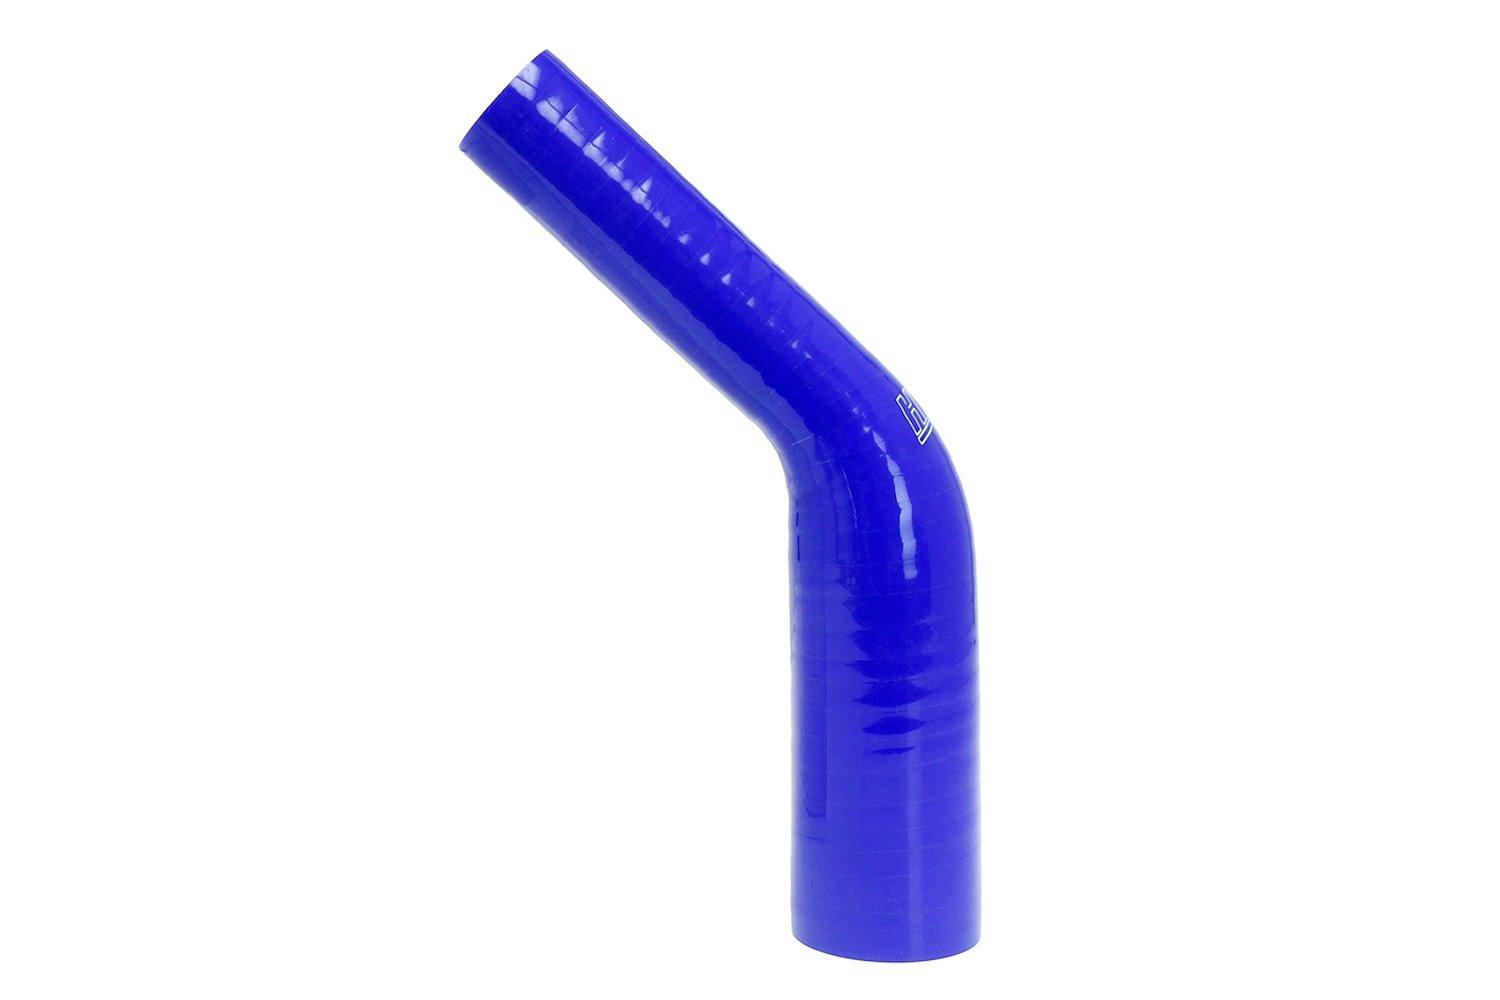 HTSER45-062-075-BLUE Silicone 45-Degree Elbow Hose, High-Temp 4-Ply Reinforced, 5/8 in. - 3/4 in. ID, Blue